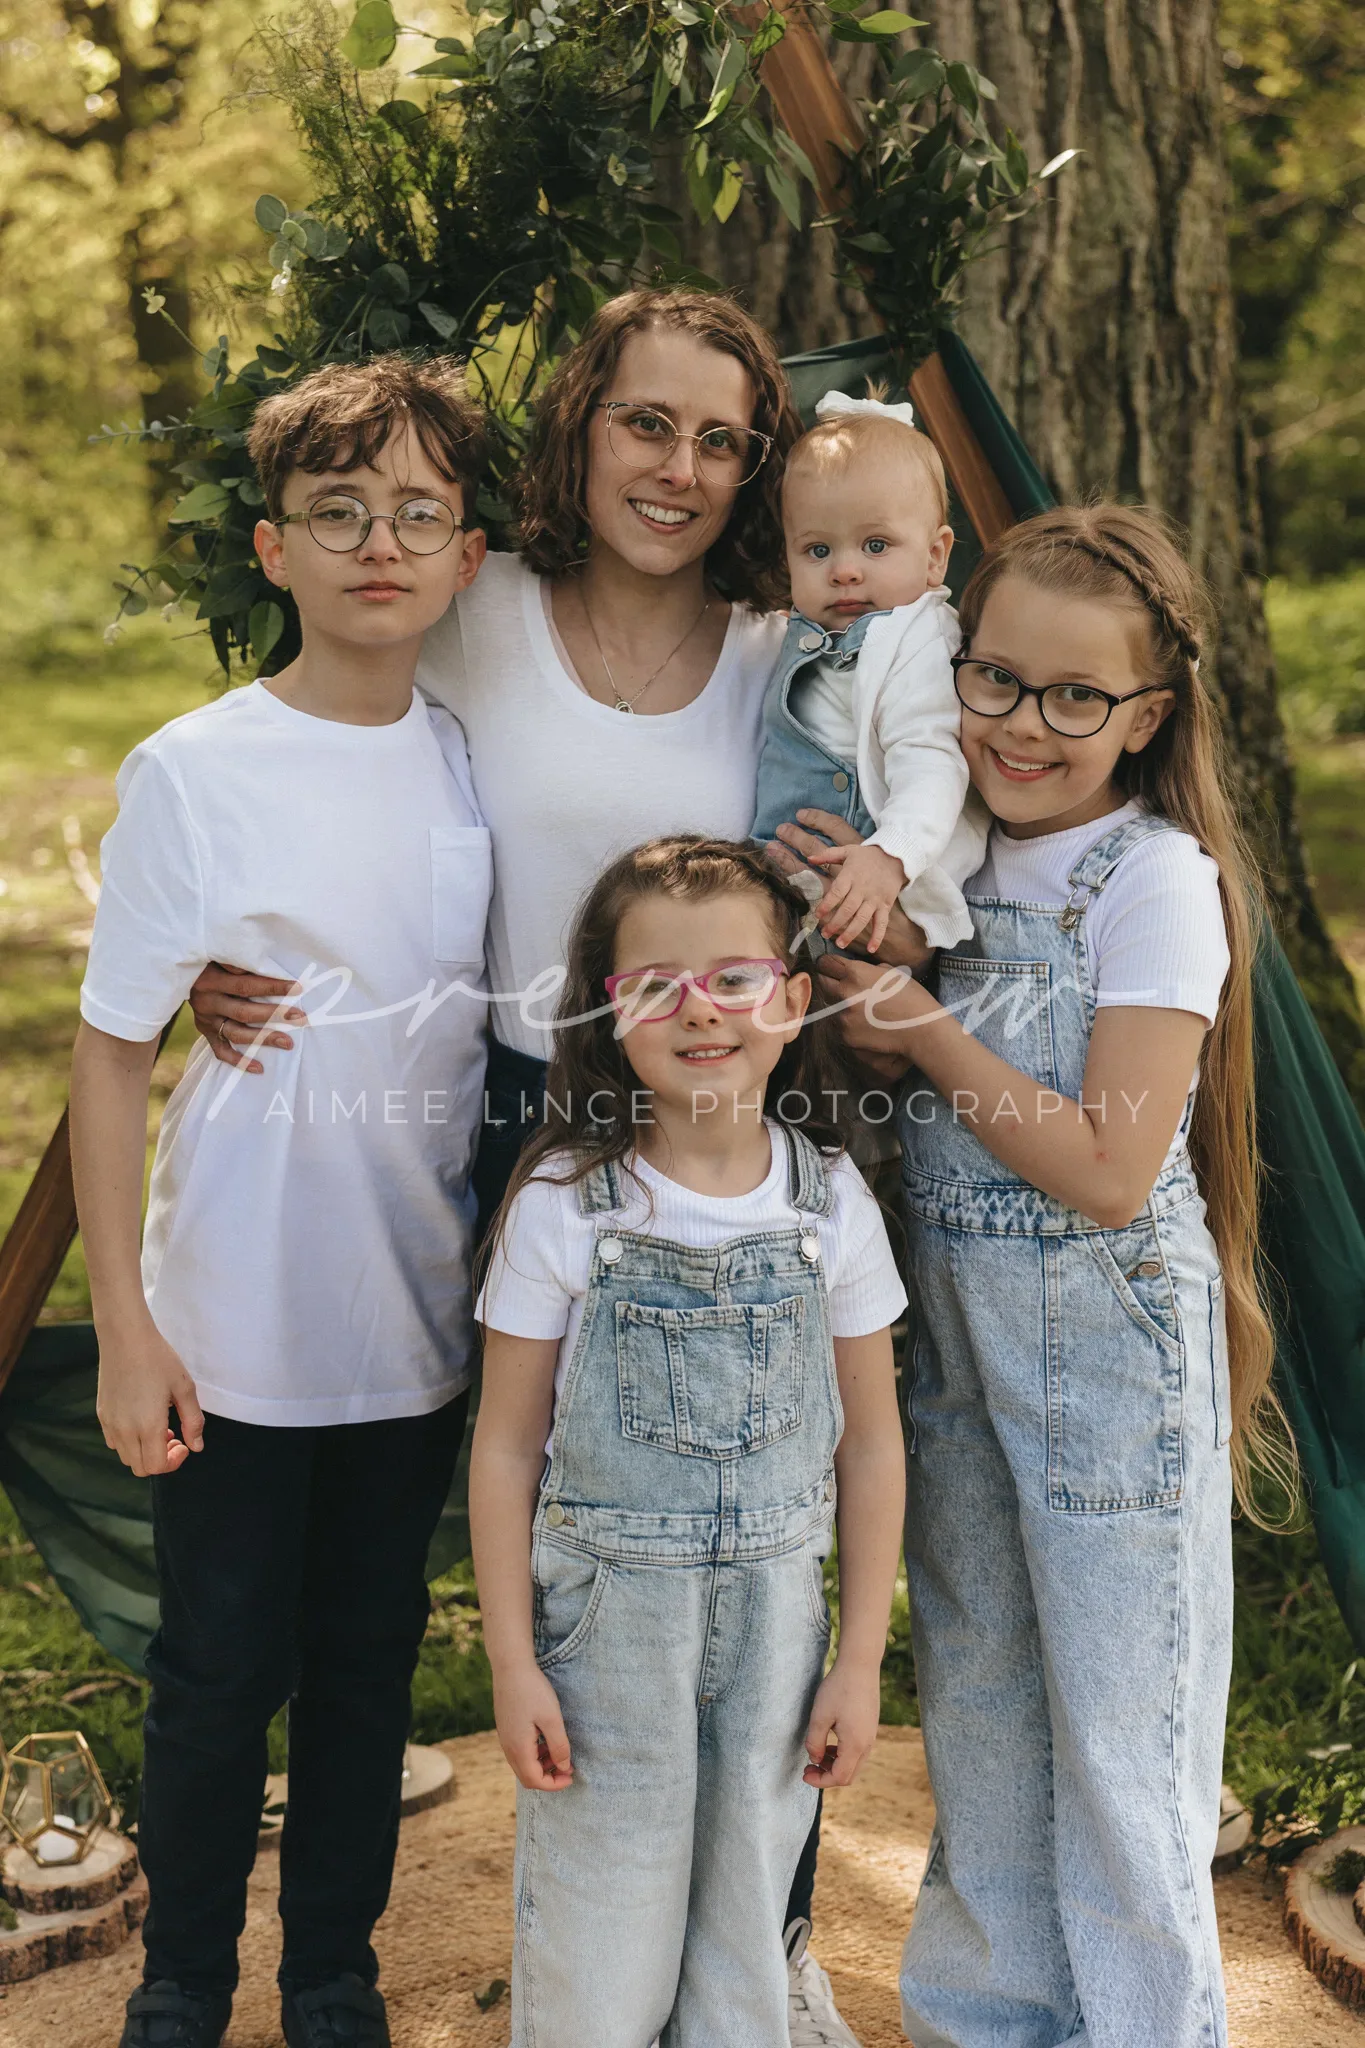 A family of five posing outdoors in a park, with two teenagers in glasses, a mother holding a baby, and a young girl, all wearing denim and white shirts, near a tent and trees.